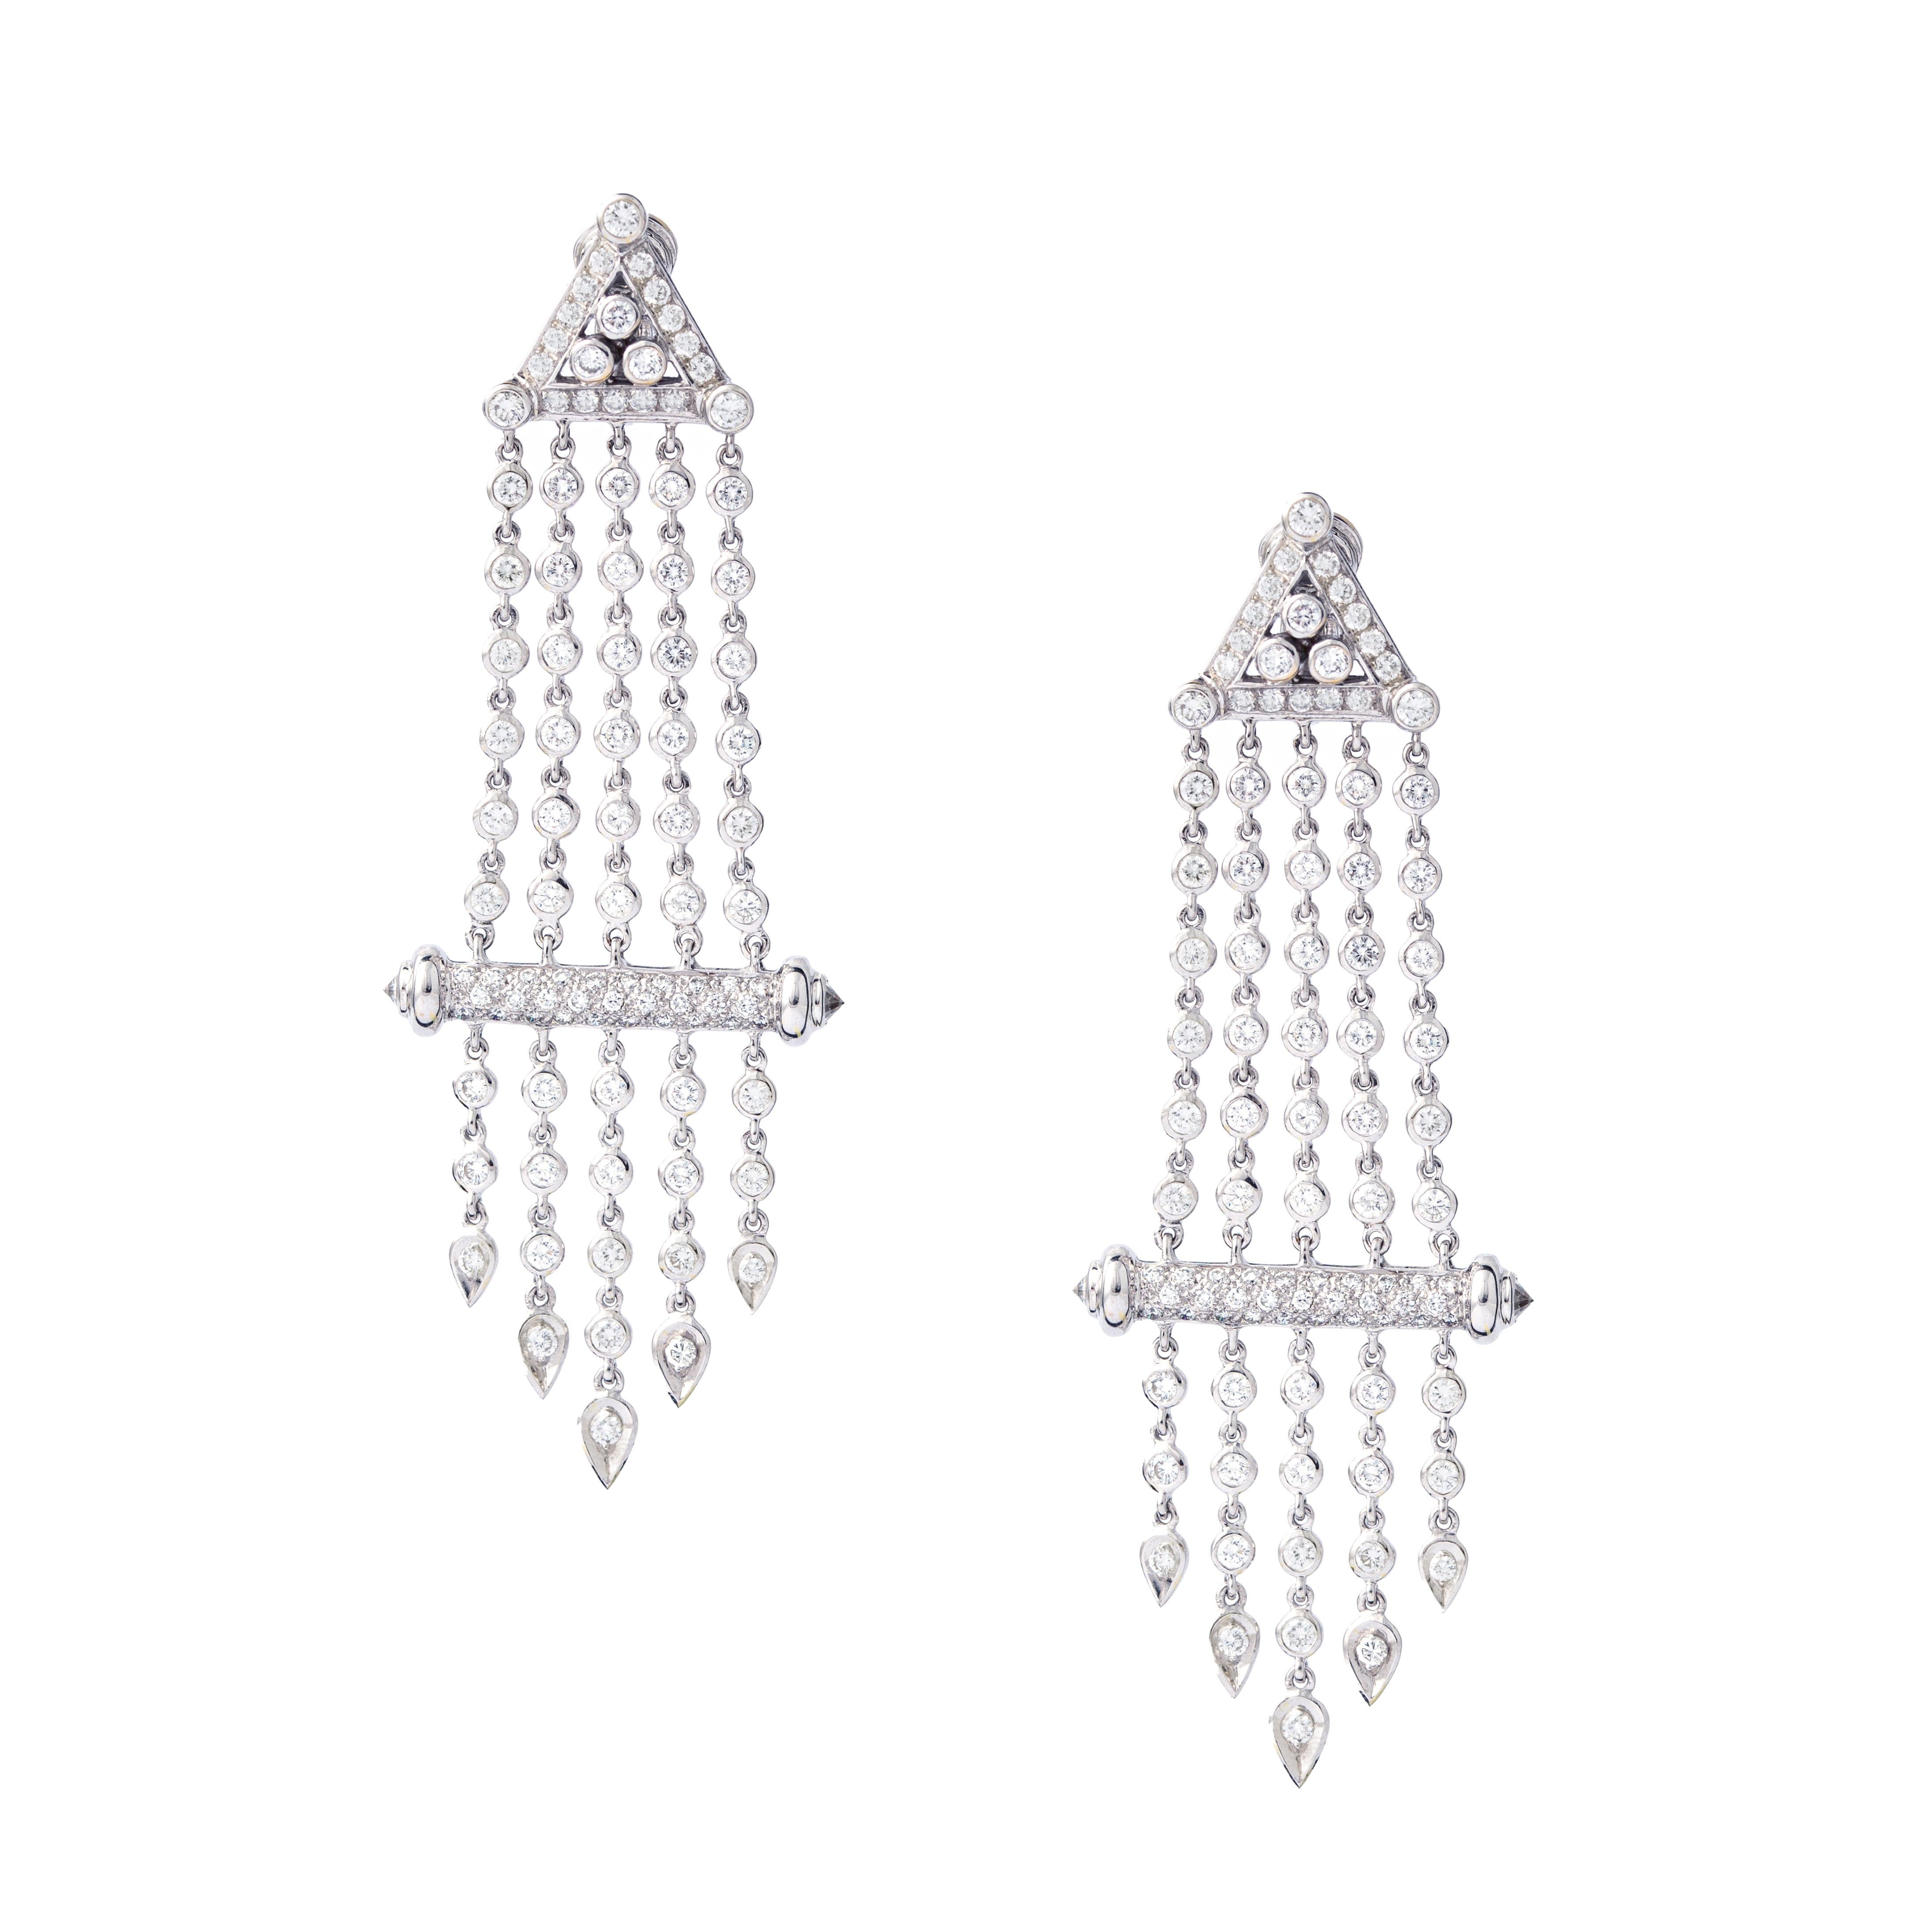 Earrings in 18kt white gold set with 3.98 cts of diamonds.

Length: 7.00 centimeters (2.76 inches).

Total weight: 18.42 grams.

Maximum Width : 2.50 centimeters (0.98 inches).